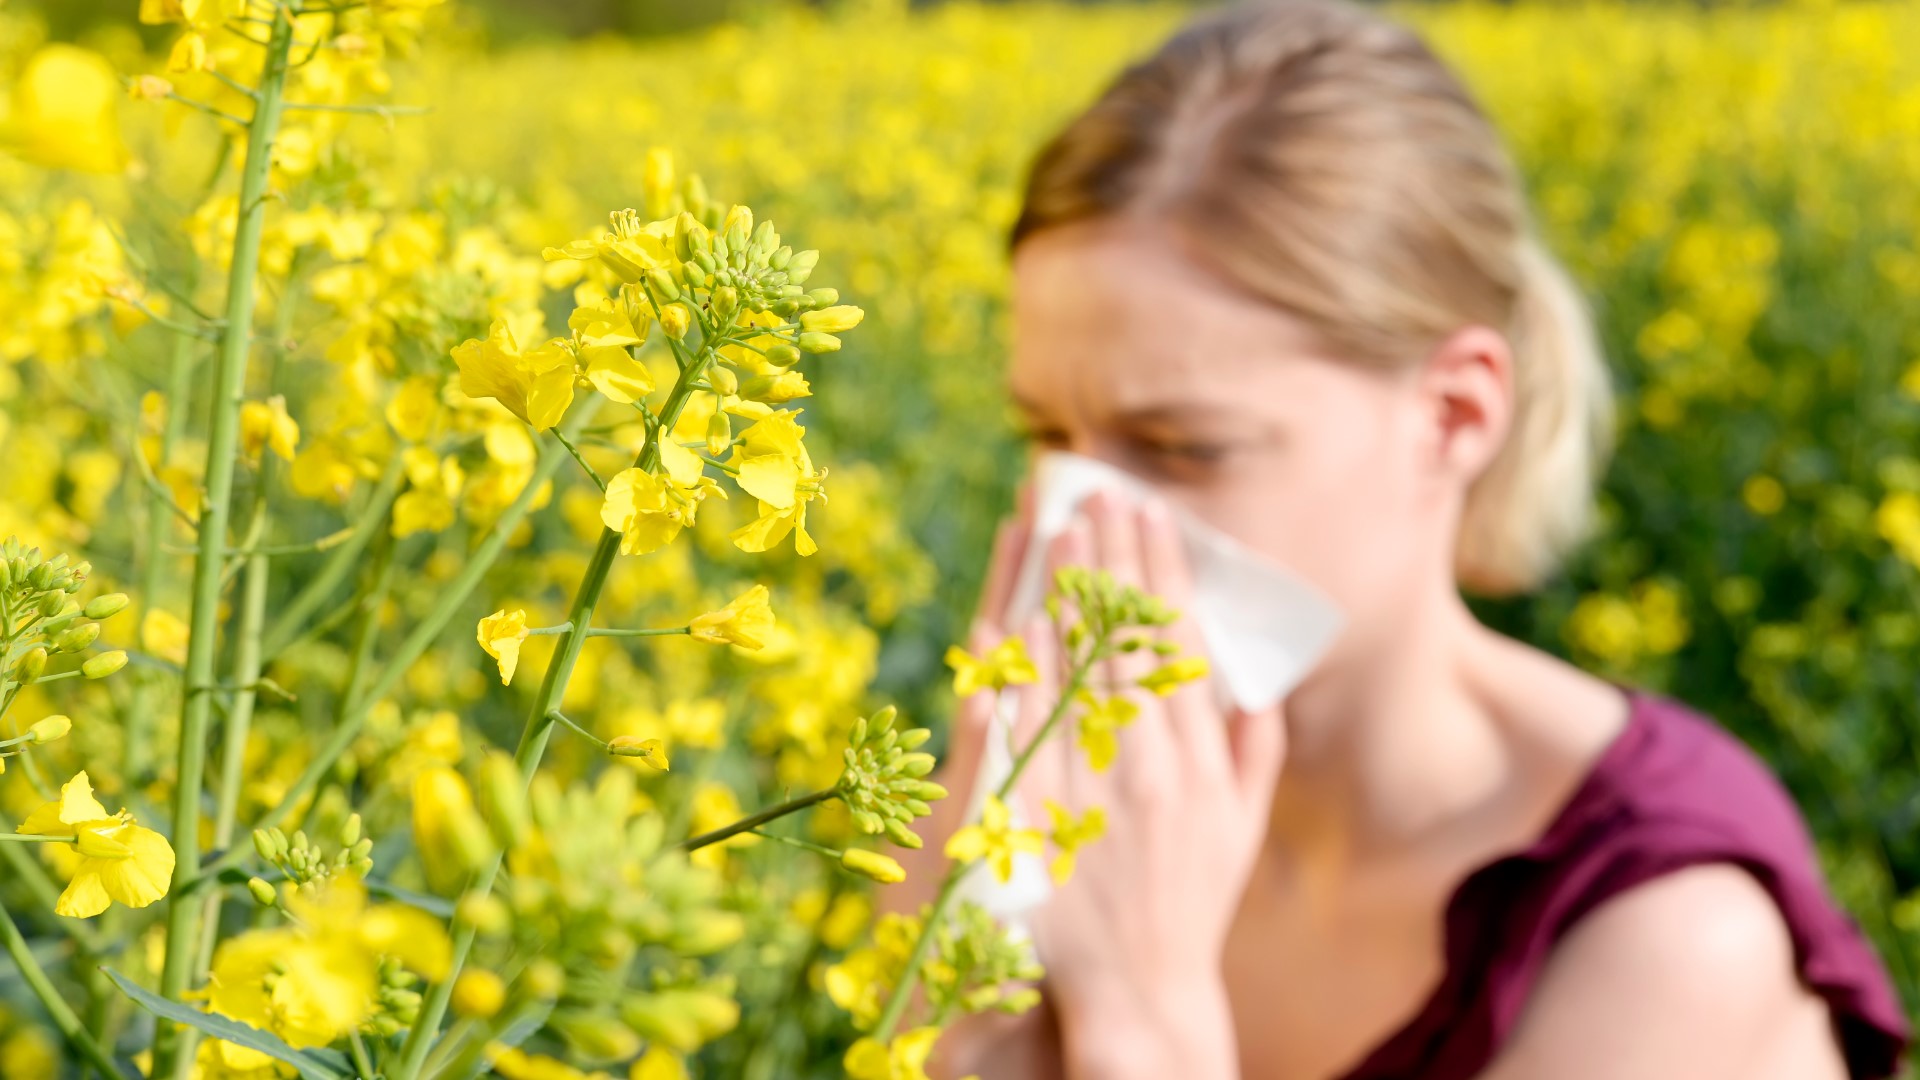 Meagan Massey and Zac Scott tell us why allergies are so bad in CenTex and what we can do about it.